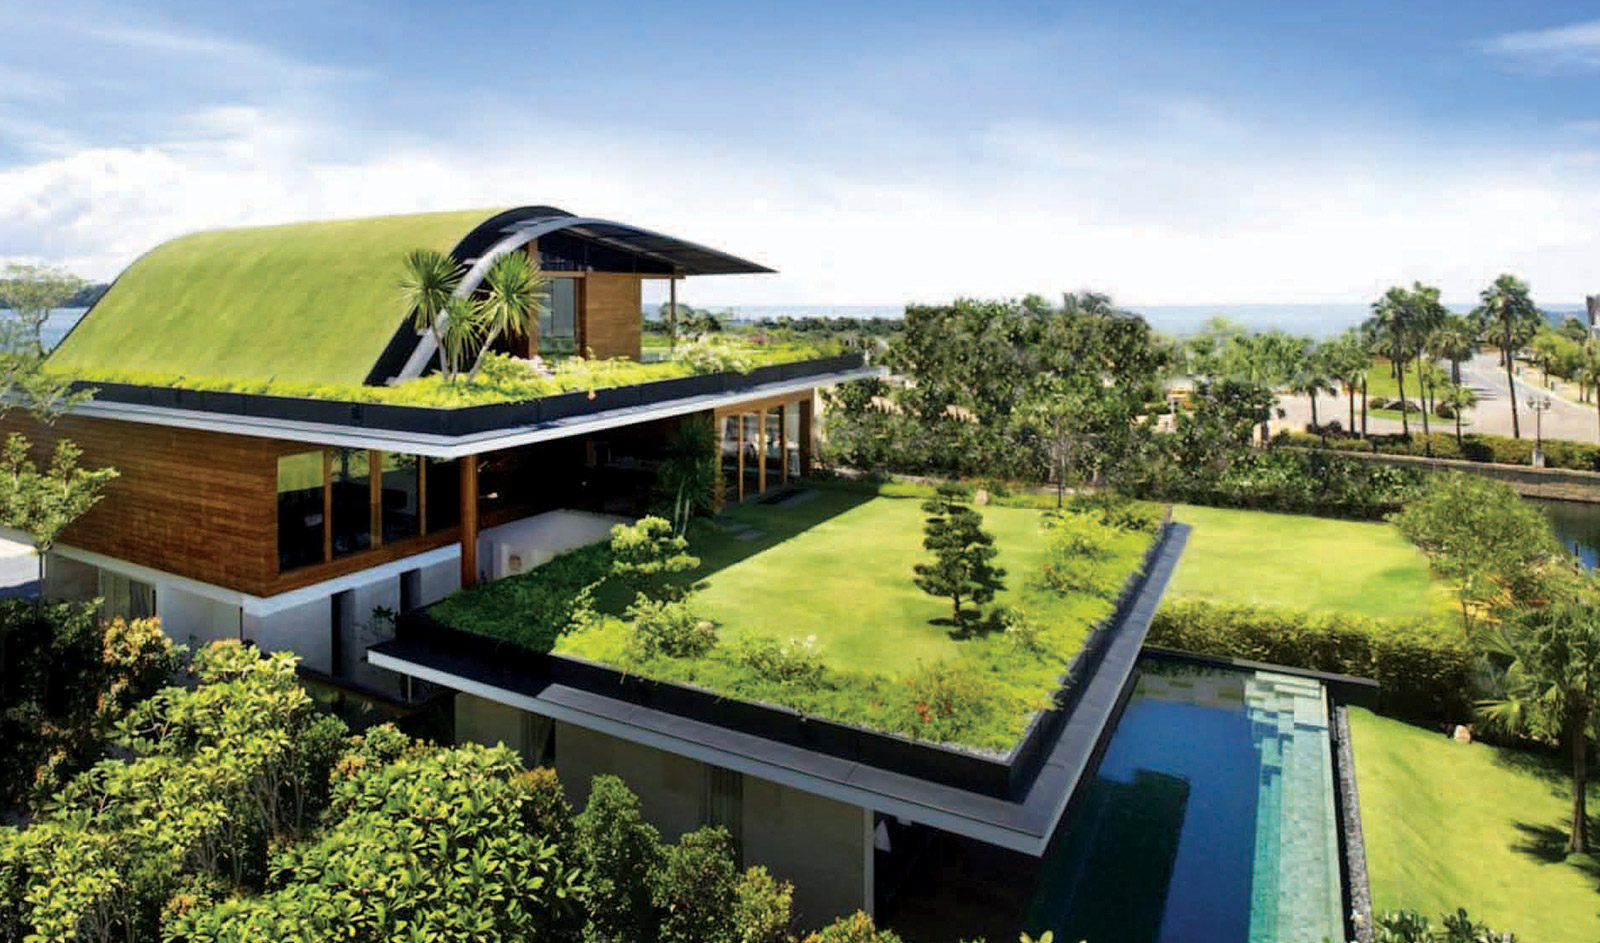 How to build a green sustainable home